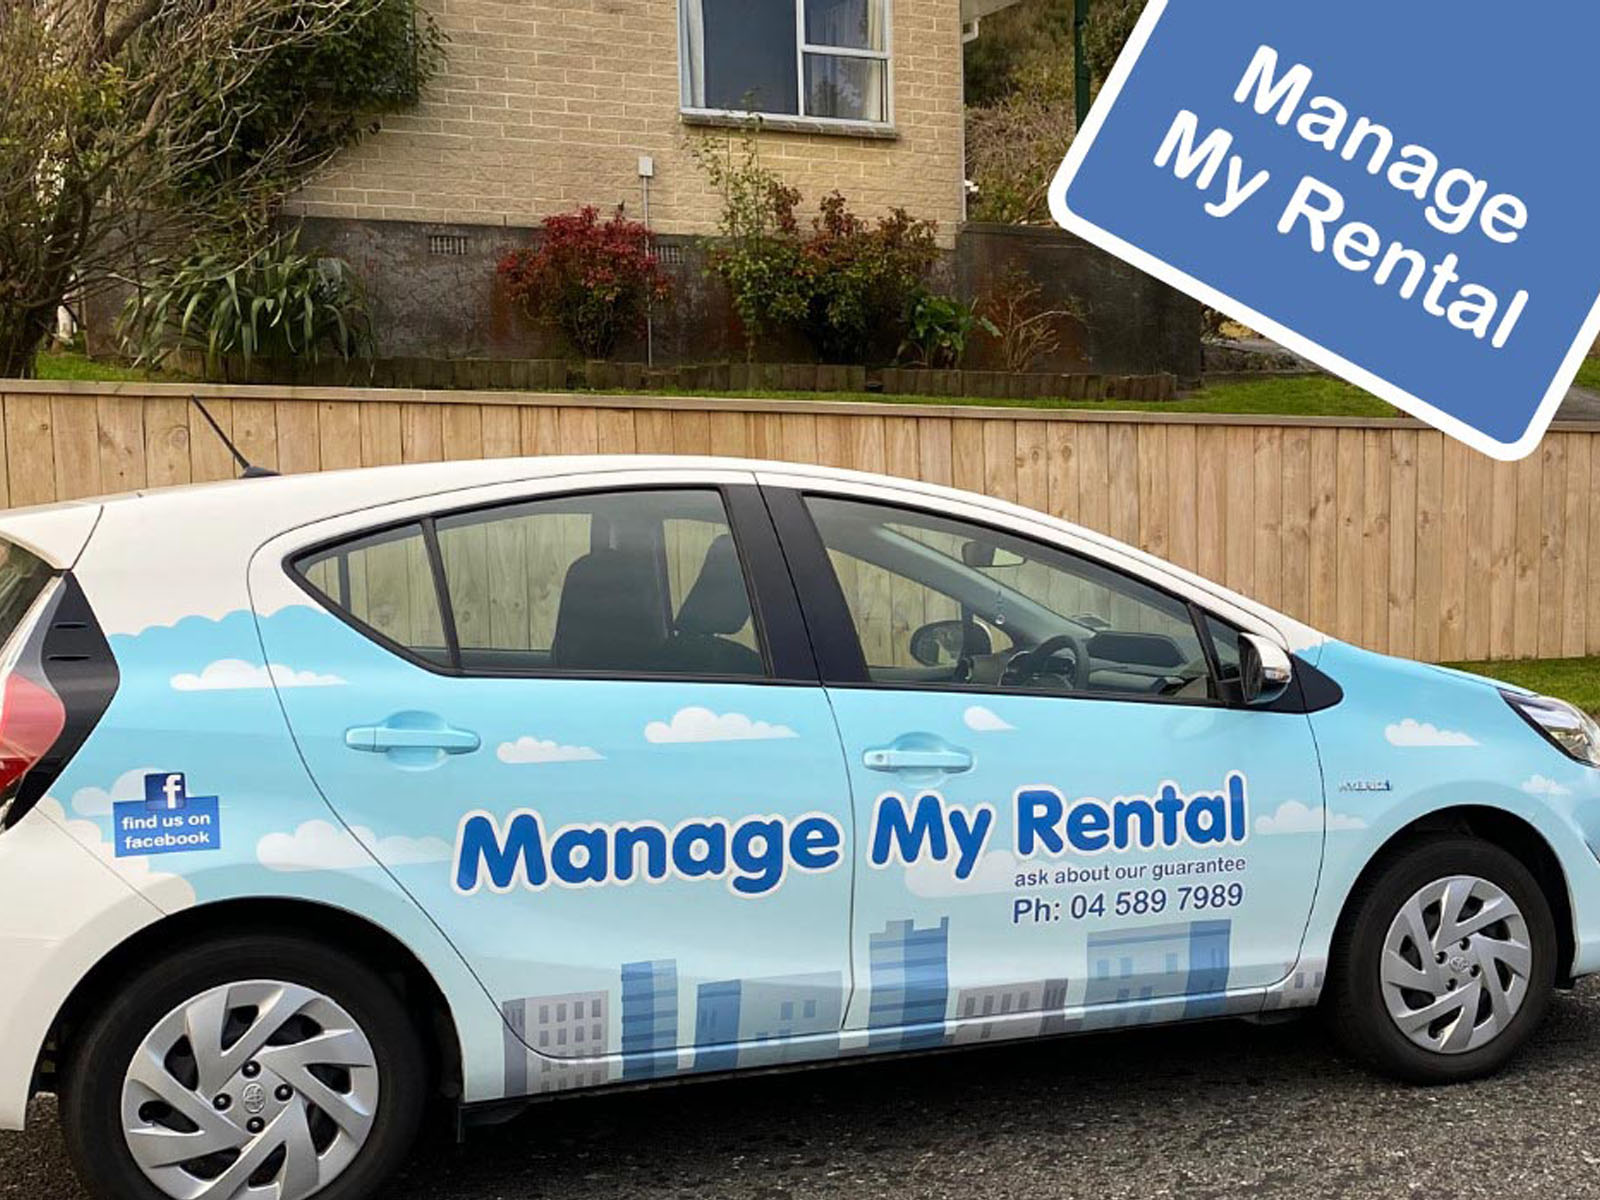 Manage My Rental - 7 Essential Questions